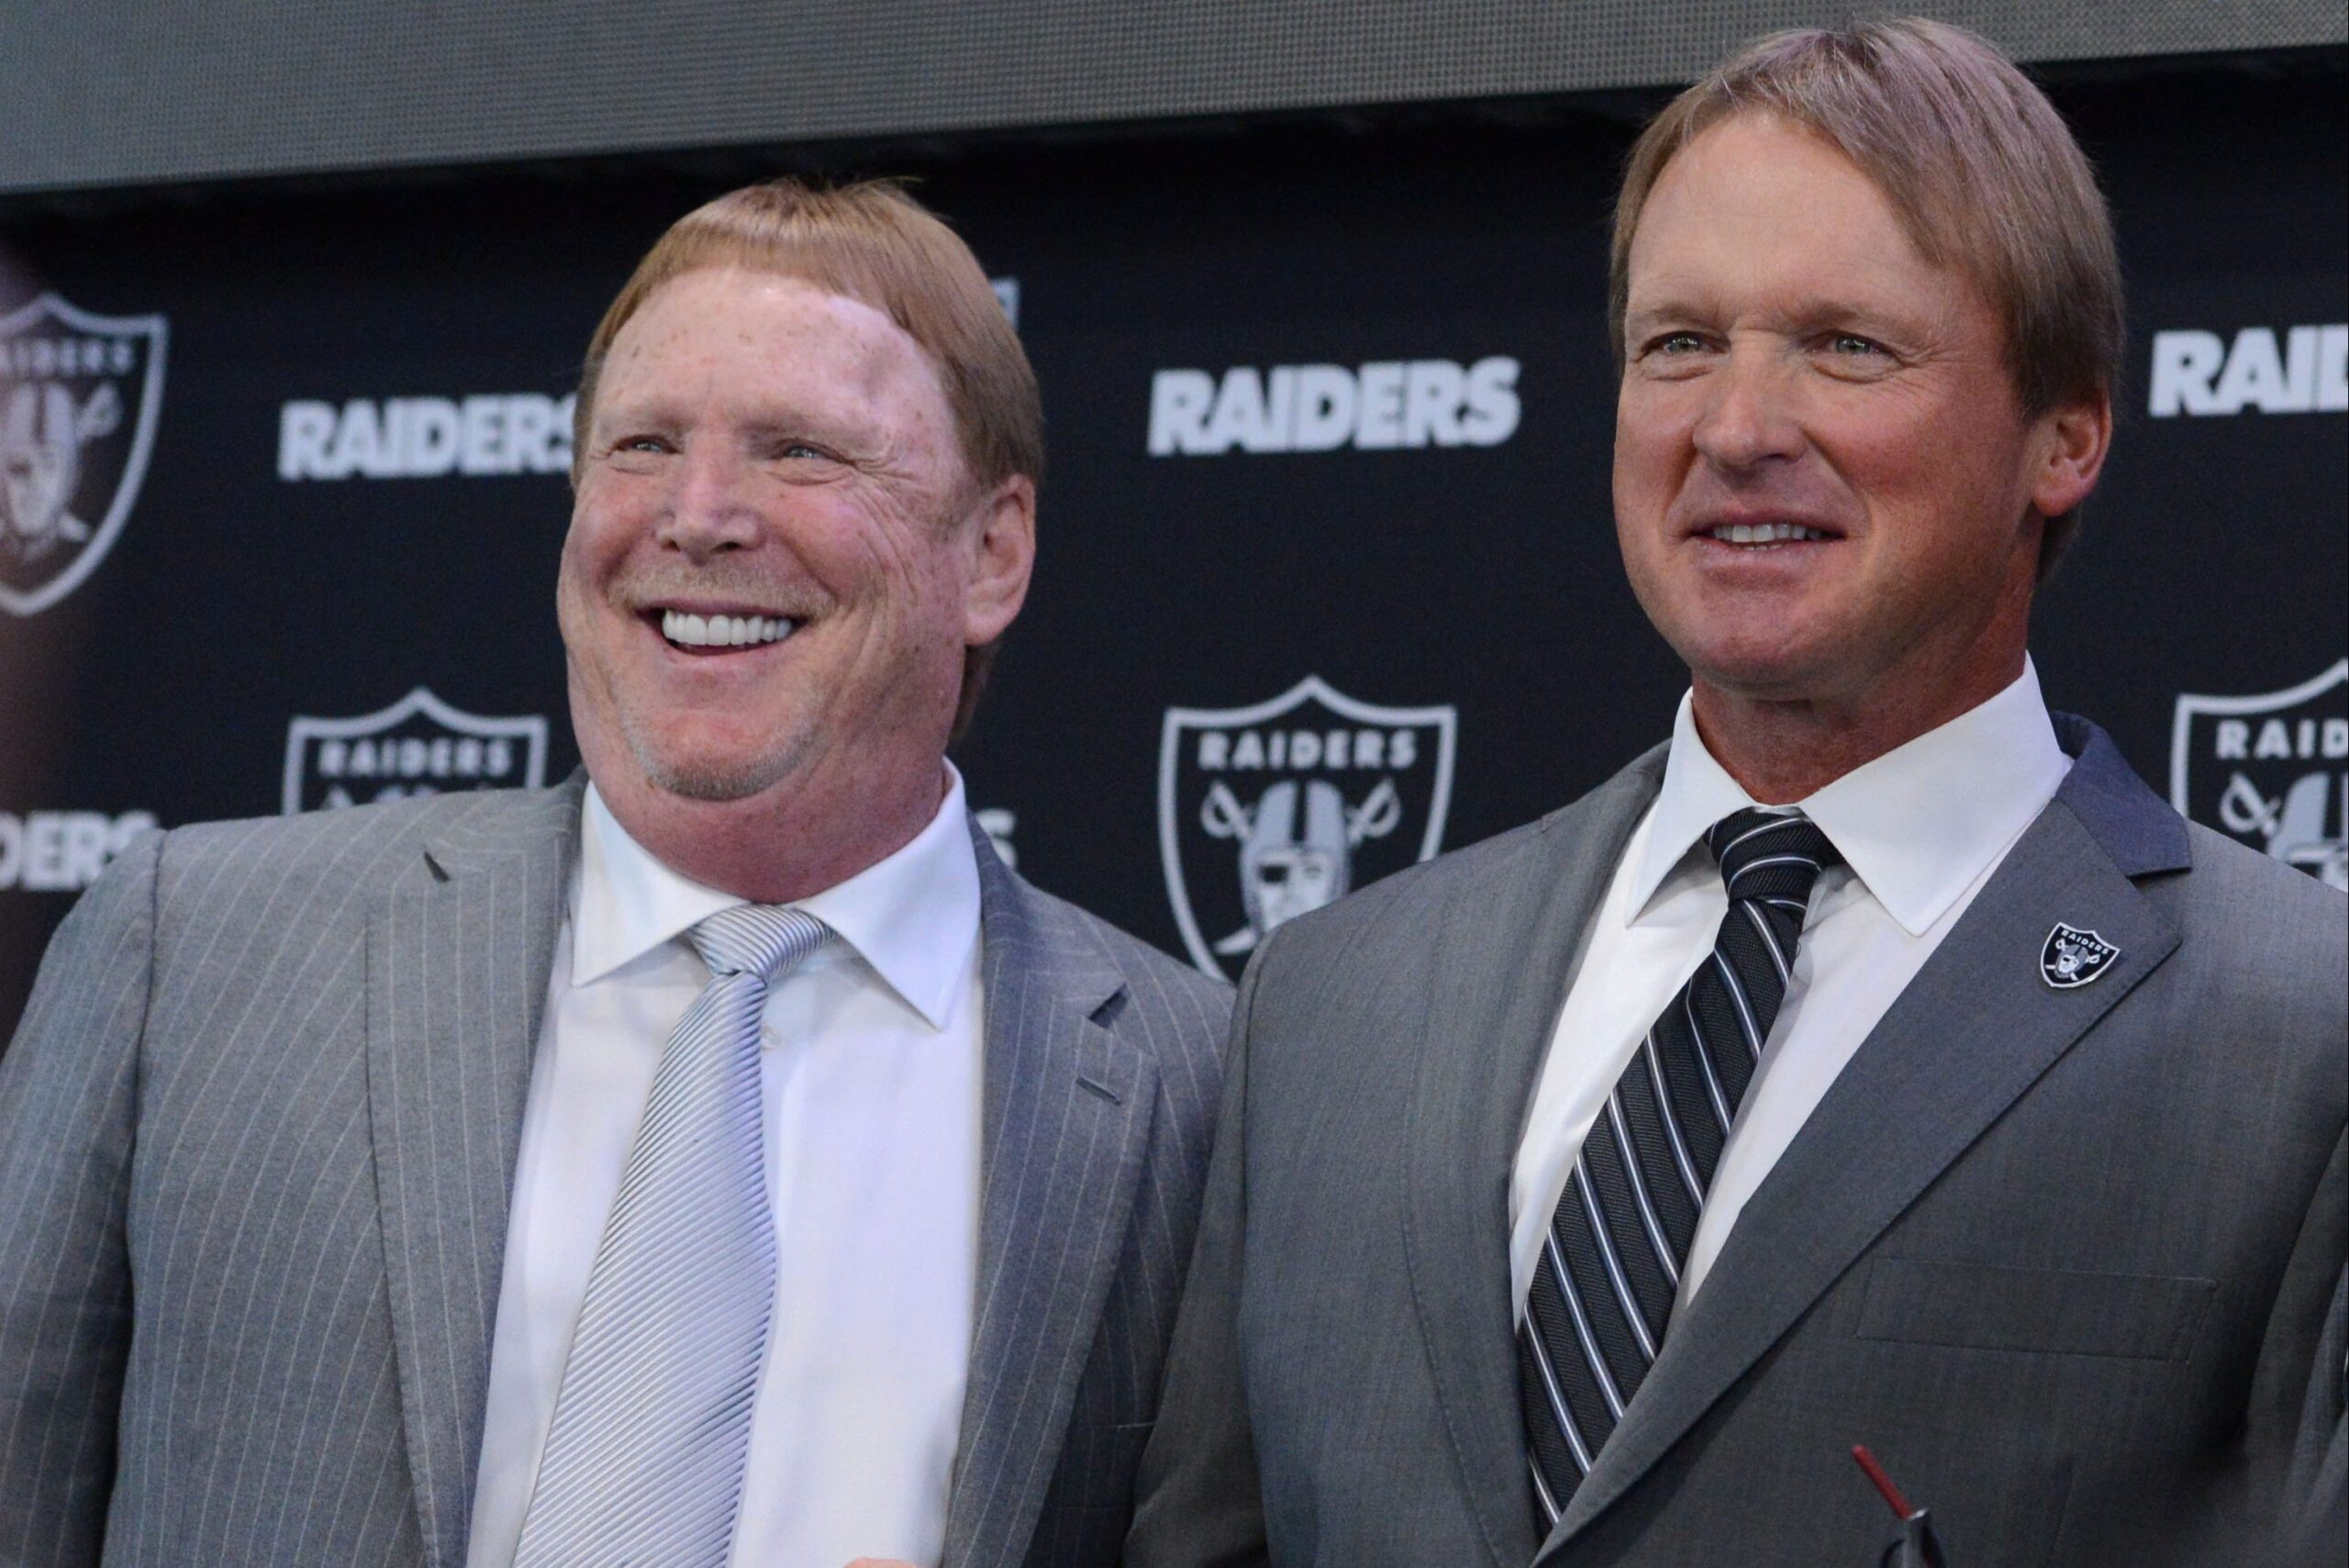 Raiders owner Mark Davis is pissed off and it shows in his response to ESPN.com's Paul Gutierrez's question.